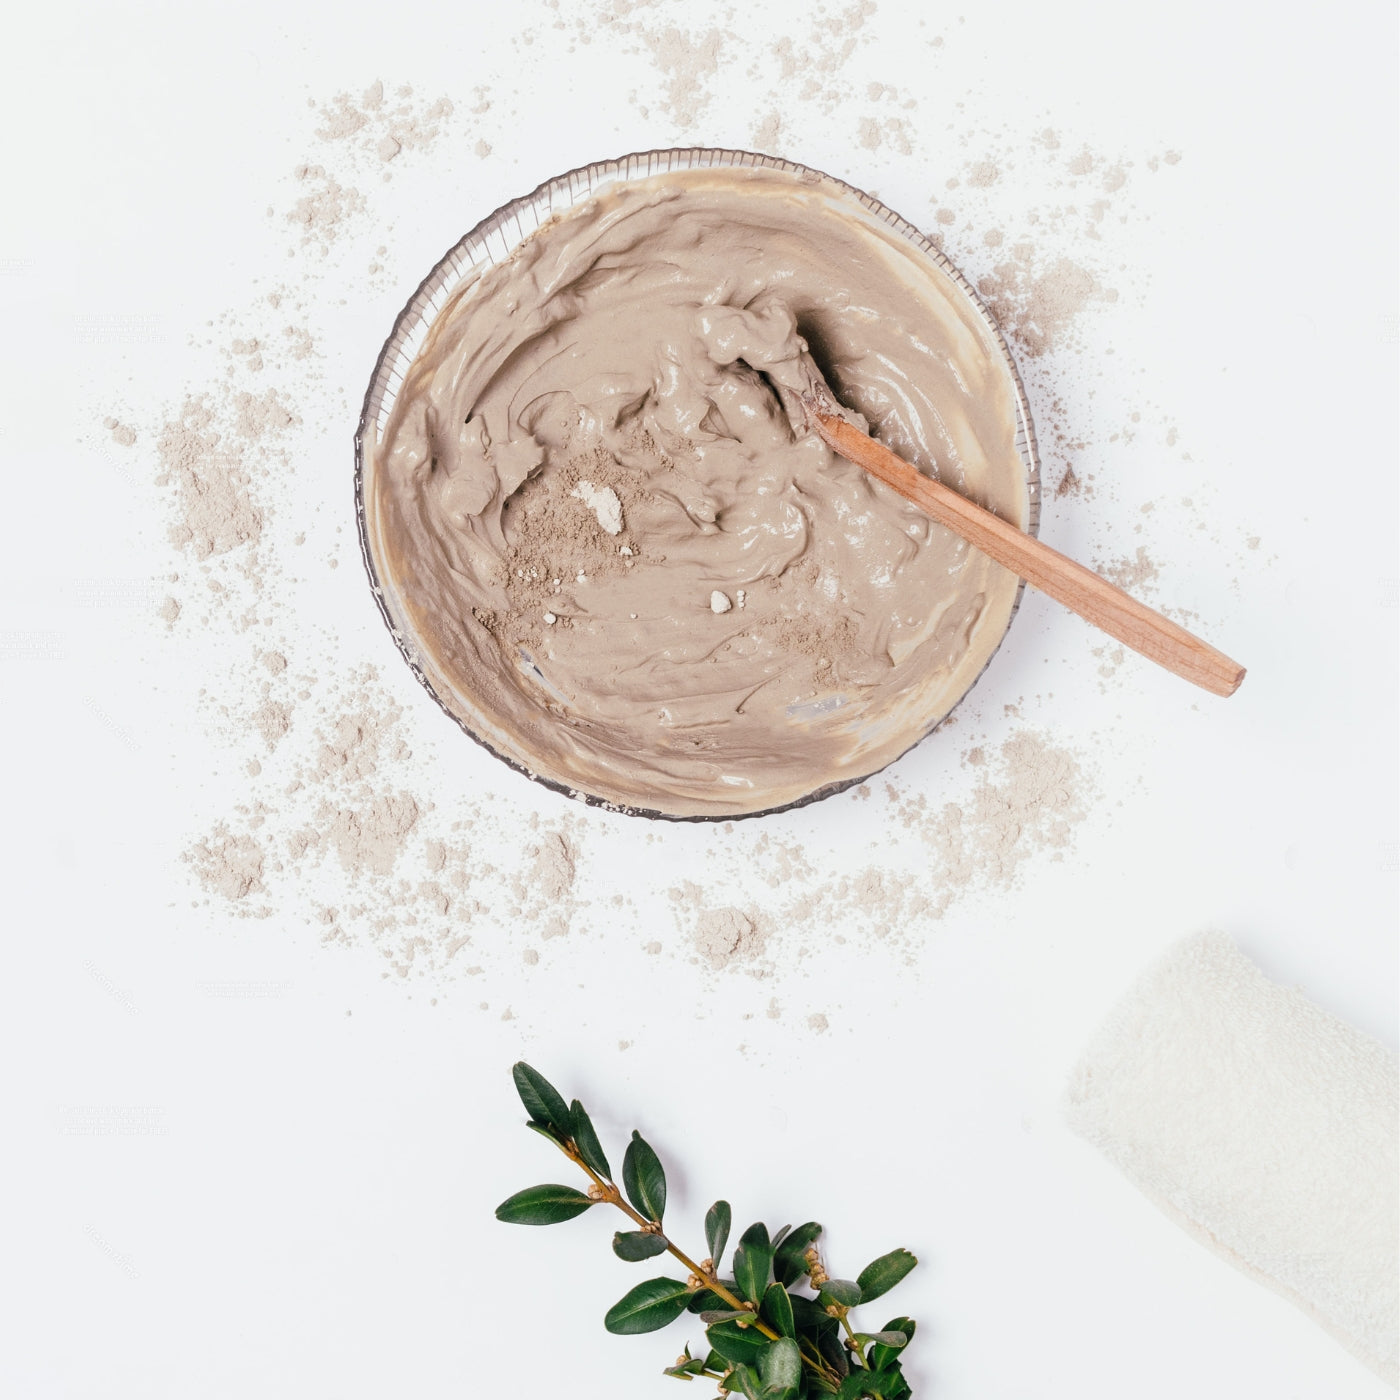 Kaolin Clay: Benefits In Your Skincare